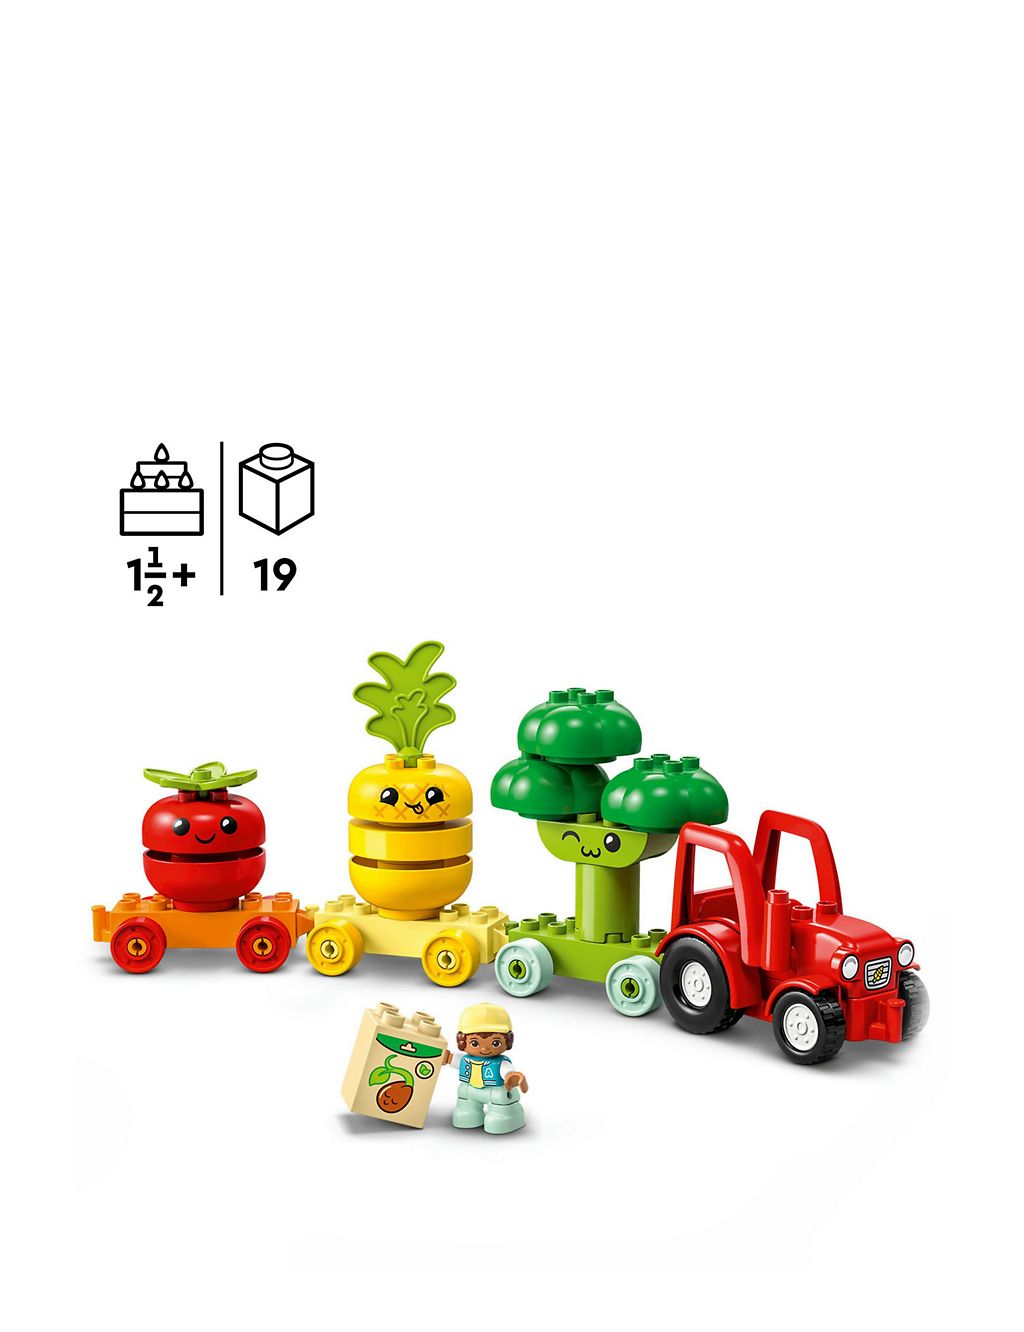 LEGO DUPLO Fruit and Vegetable Tractor Toy Set 10982 (1.5 - 3 Yrs) 2 of 6